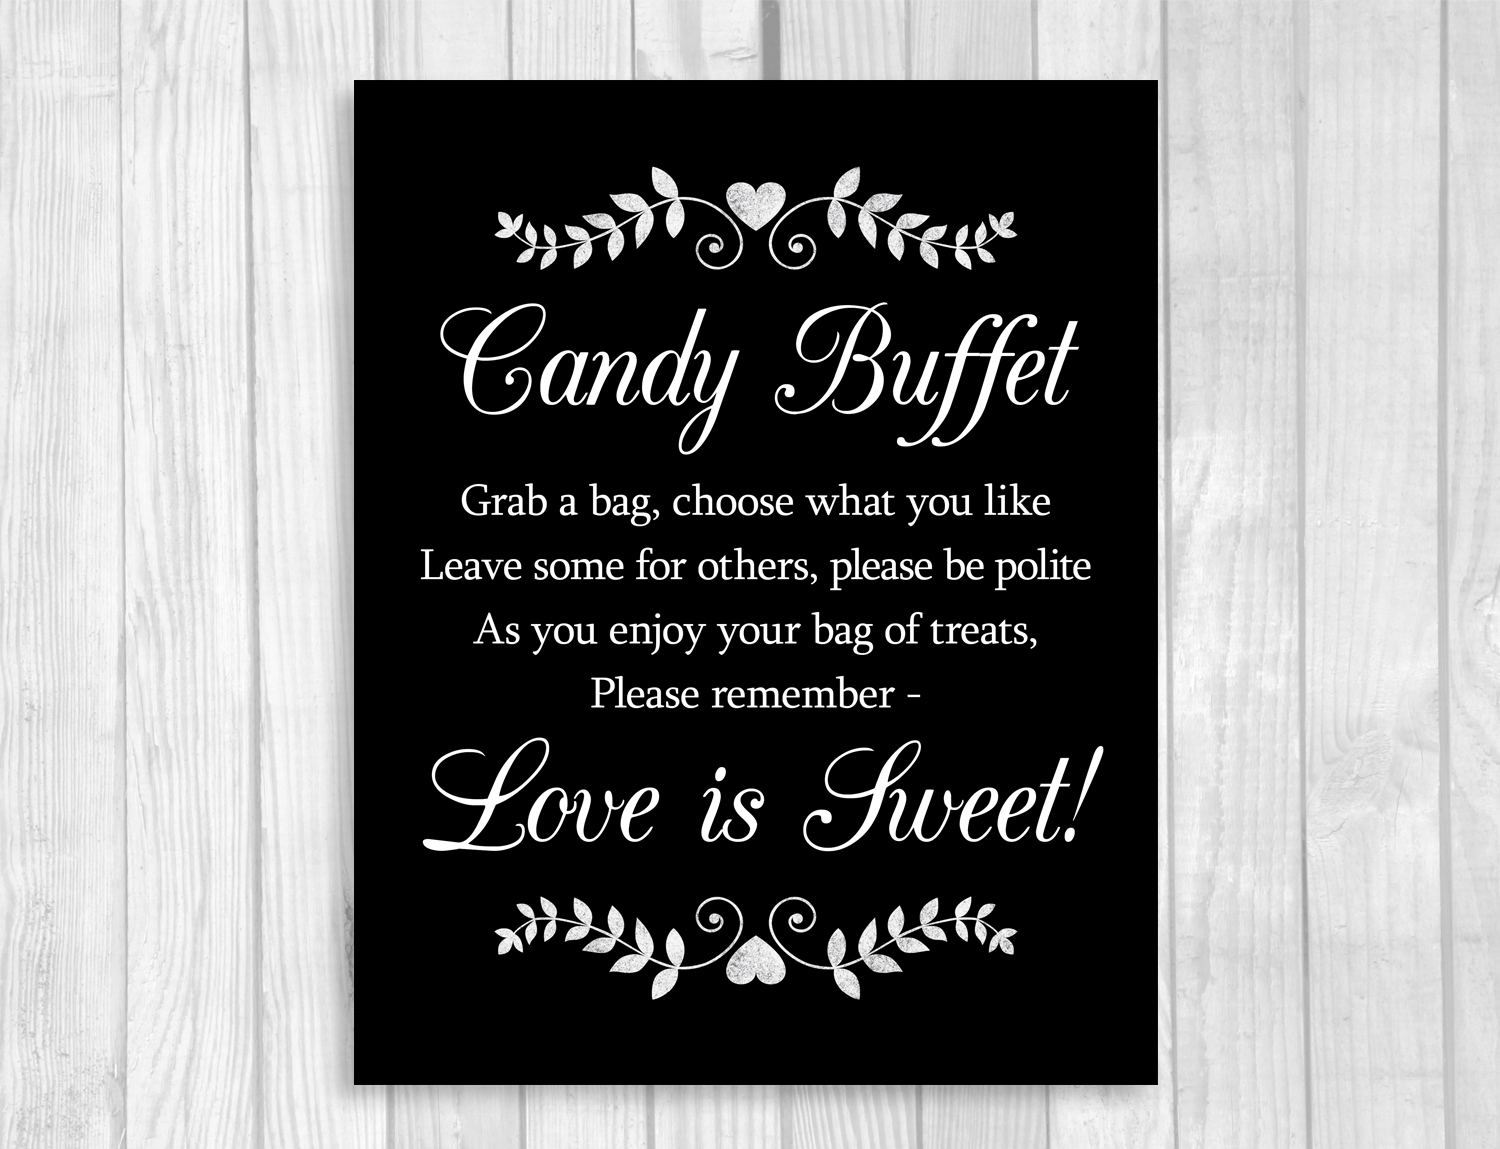 Black And White Wedding Signs With Hearts And Laurels From Weddings By Susan